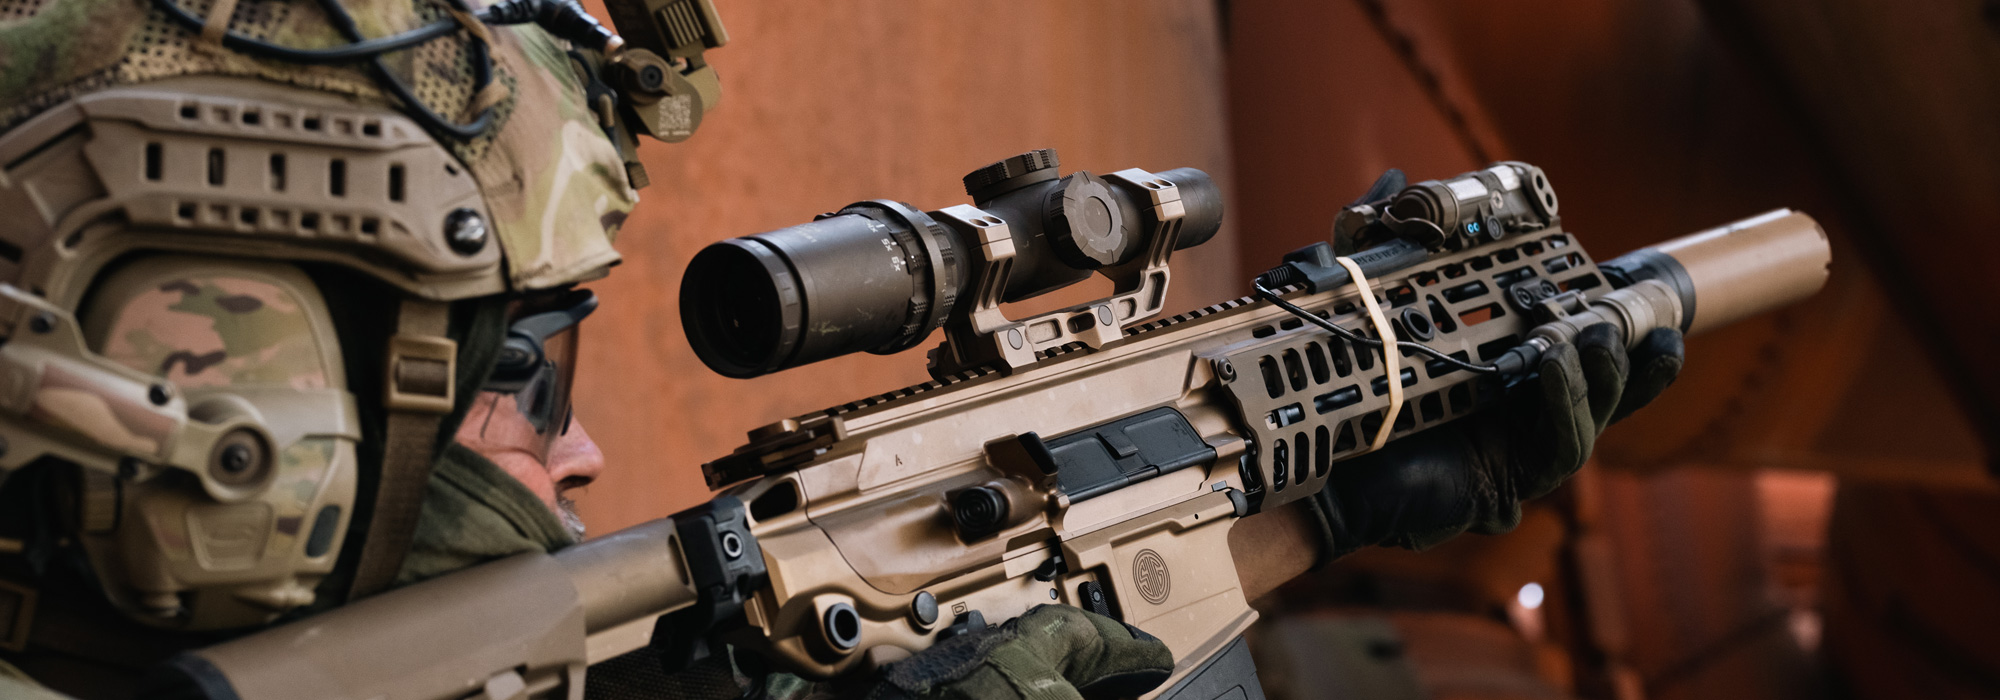 A SIG optics user sighting his rifle with SIG SAUER weapon scopes & sights.